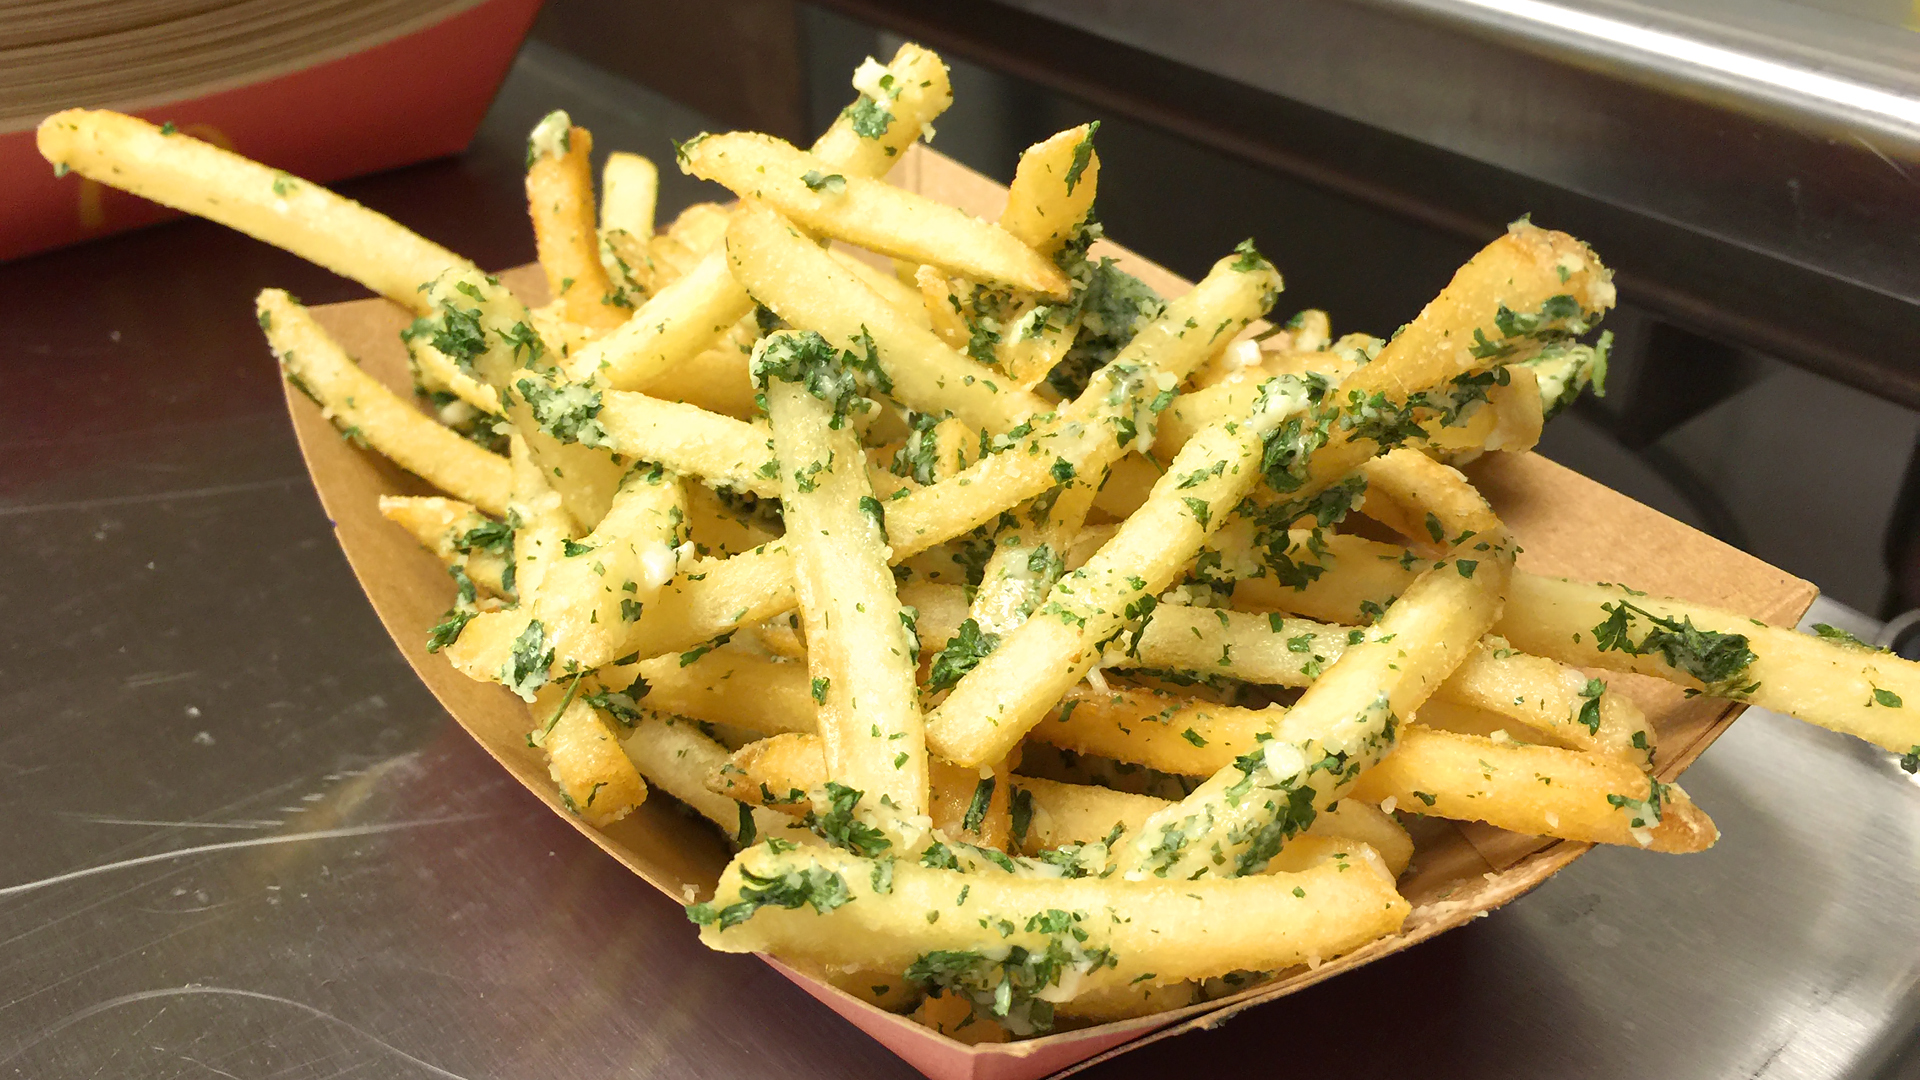 Cookies & Clogs | Food | Find out how the new Gilroy Garlic Fries from McDonald's taste and see how to make them! Enjoy the behind-the-scenes video here!